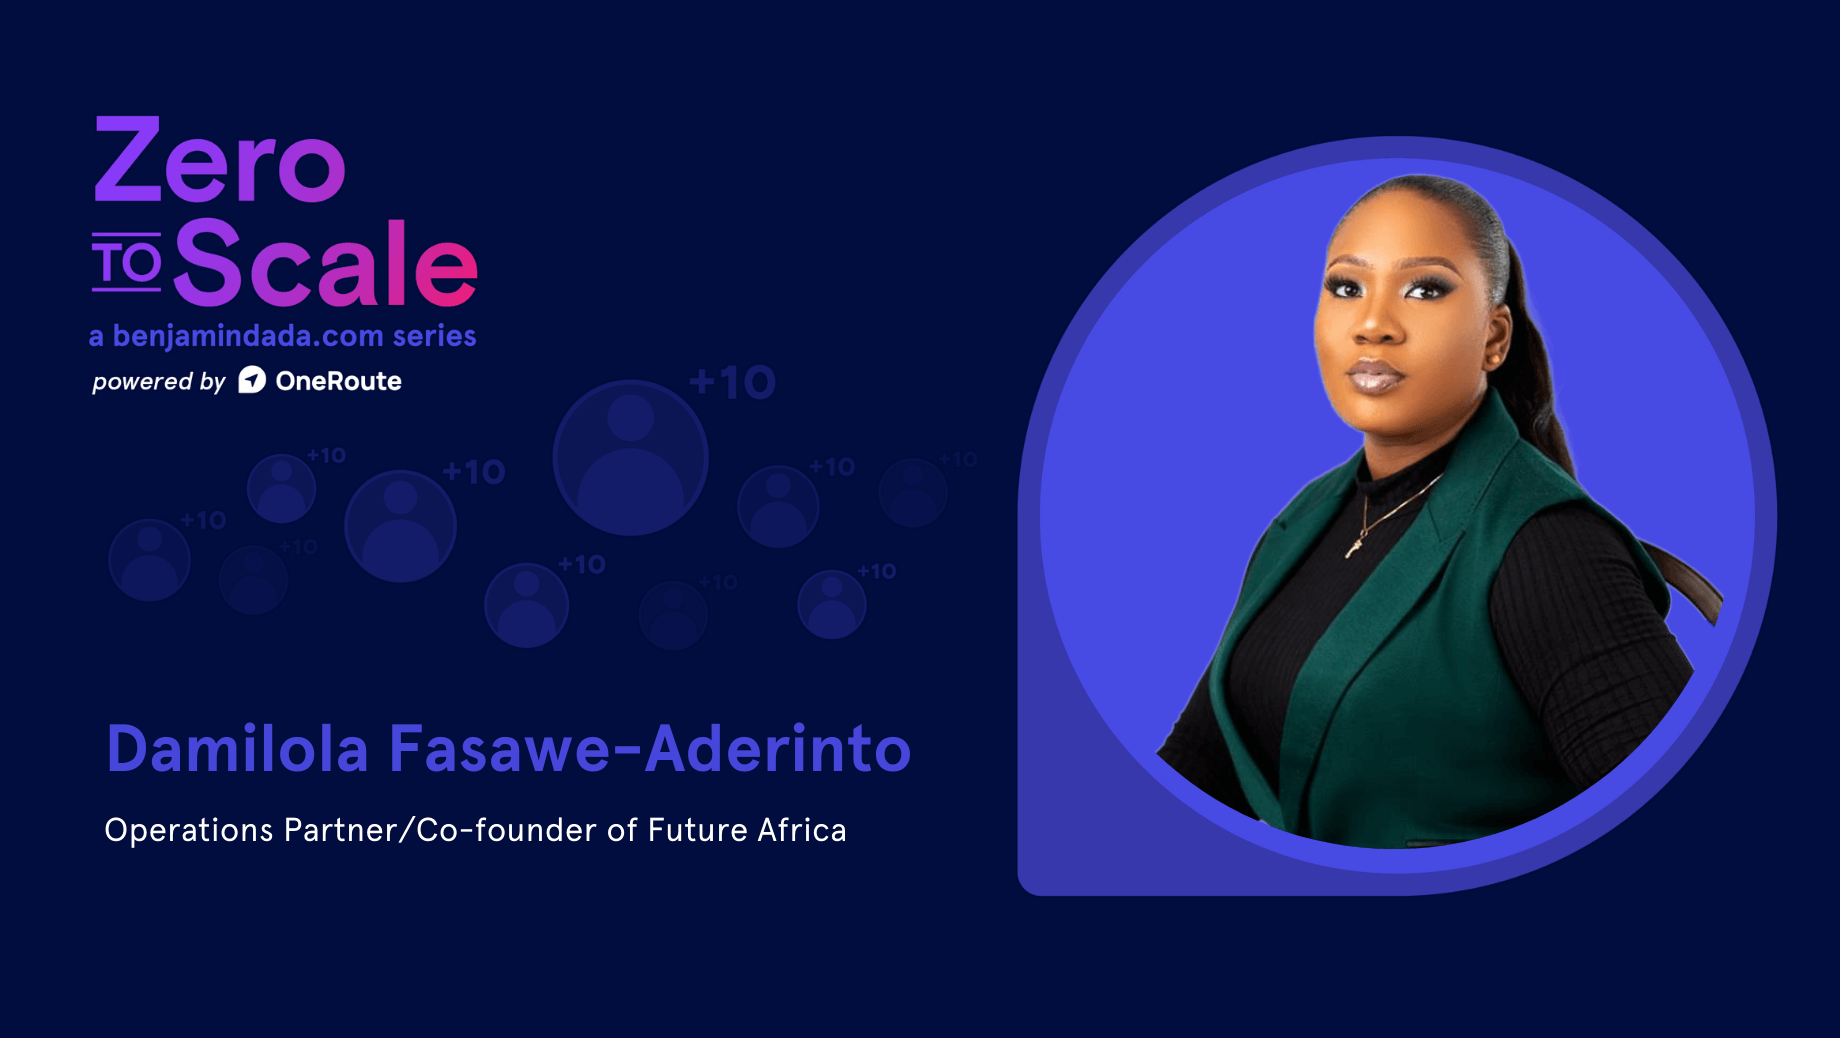 Zero To Scale: Damilola Fasawe-Aderinto — Operations Partner and Co-founder of Future Africa